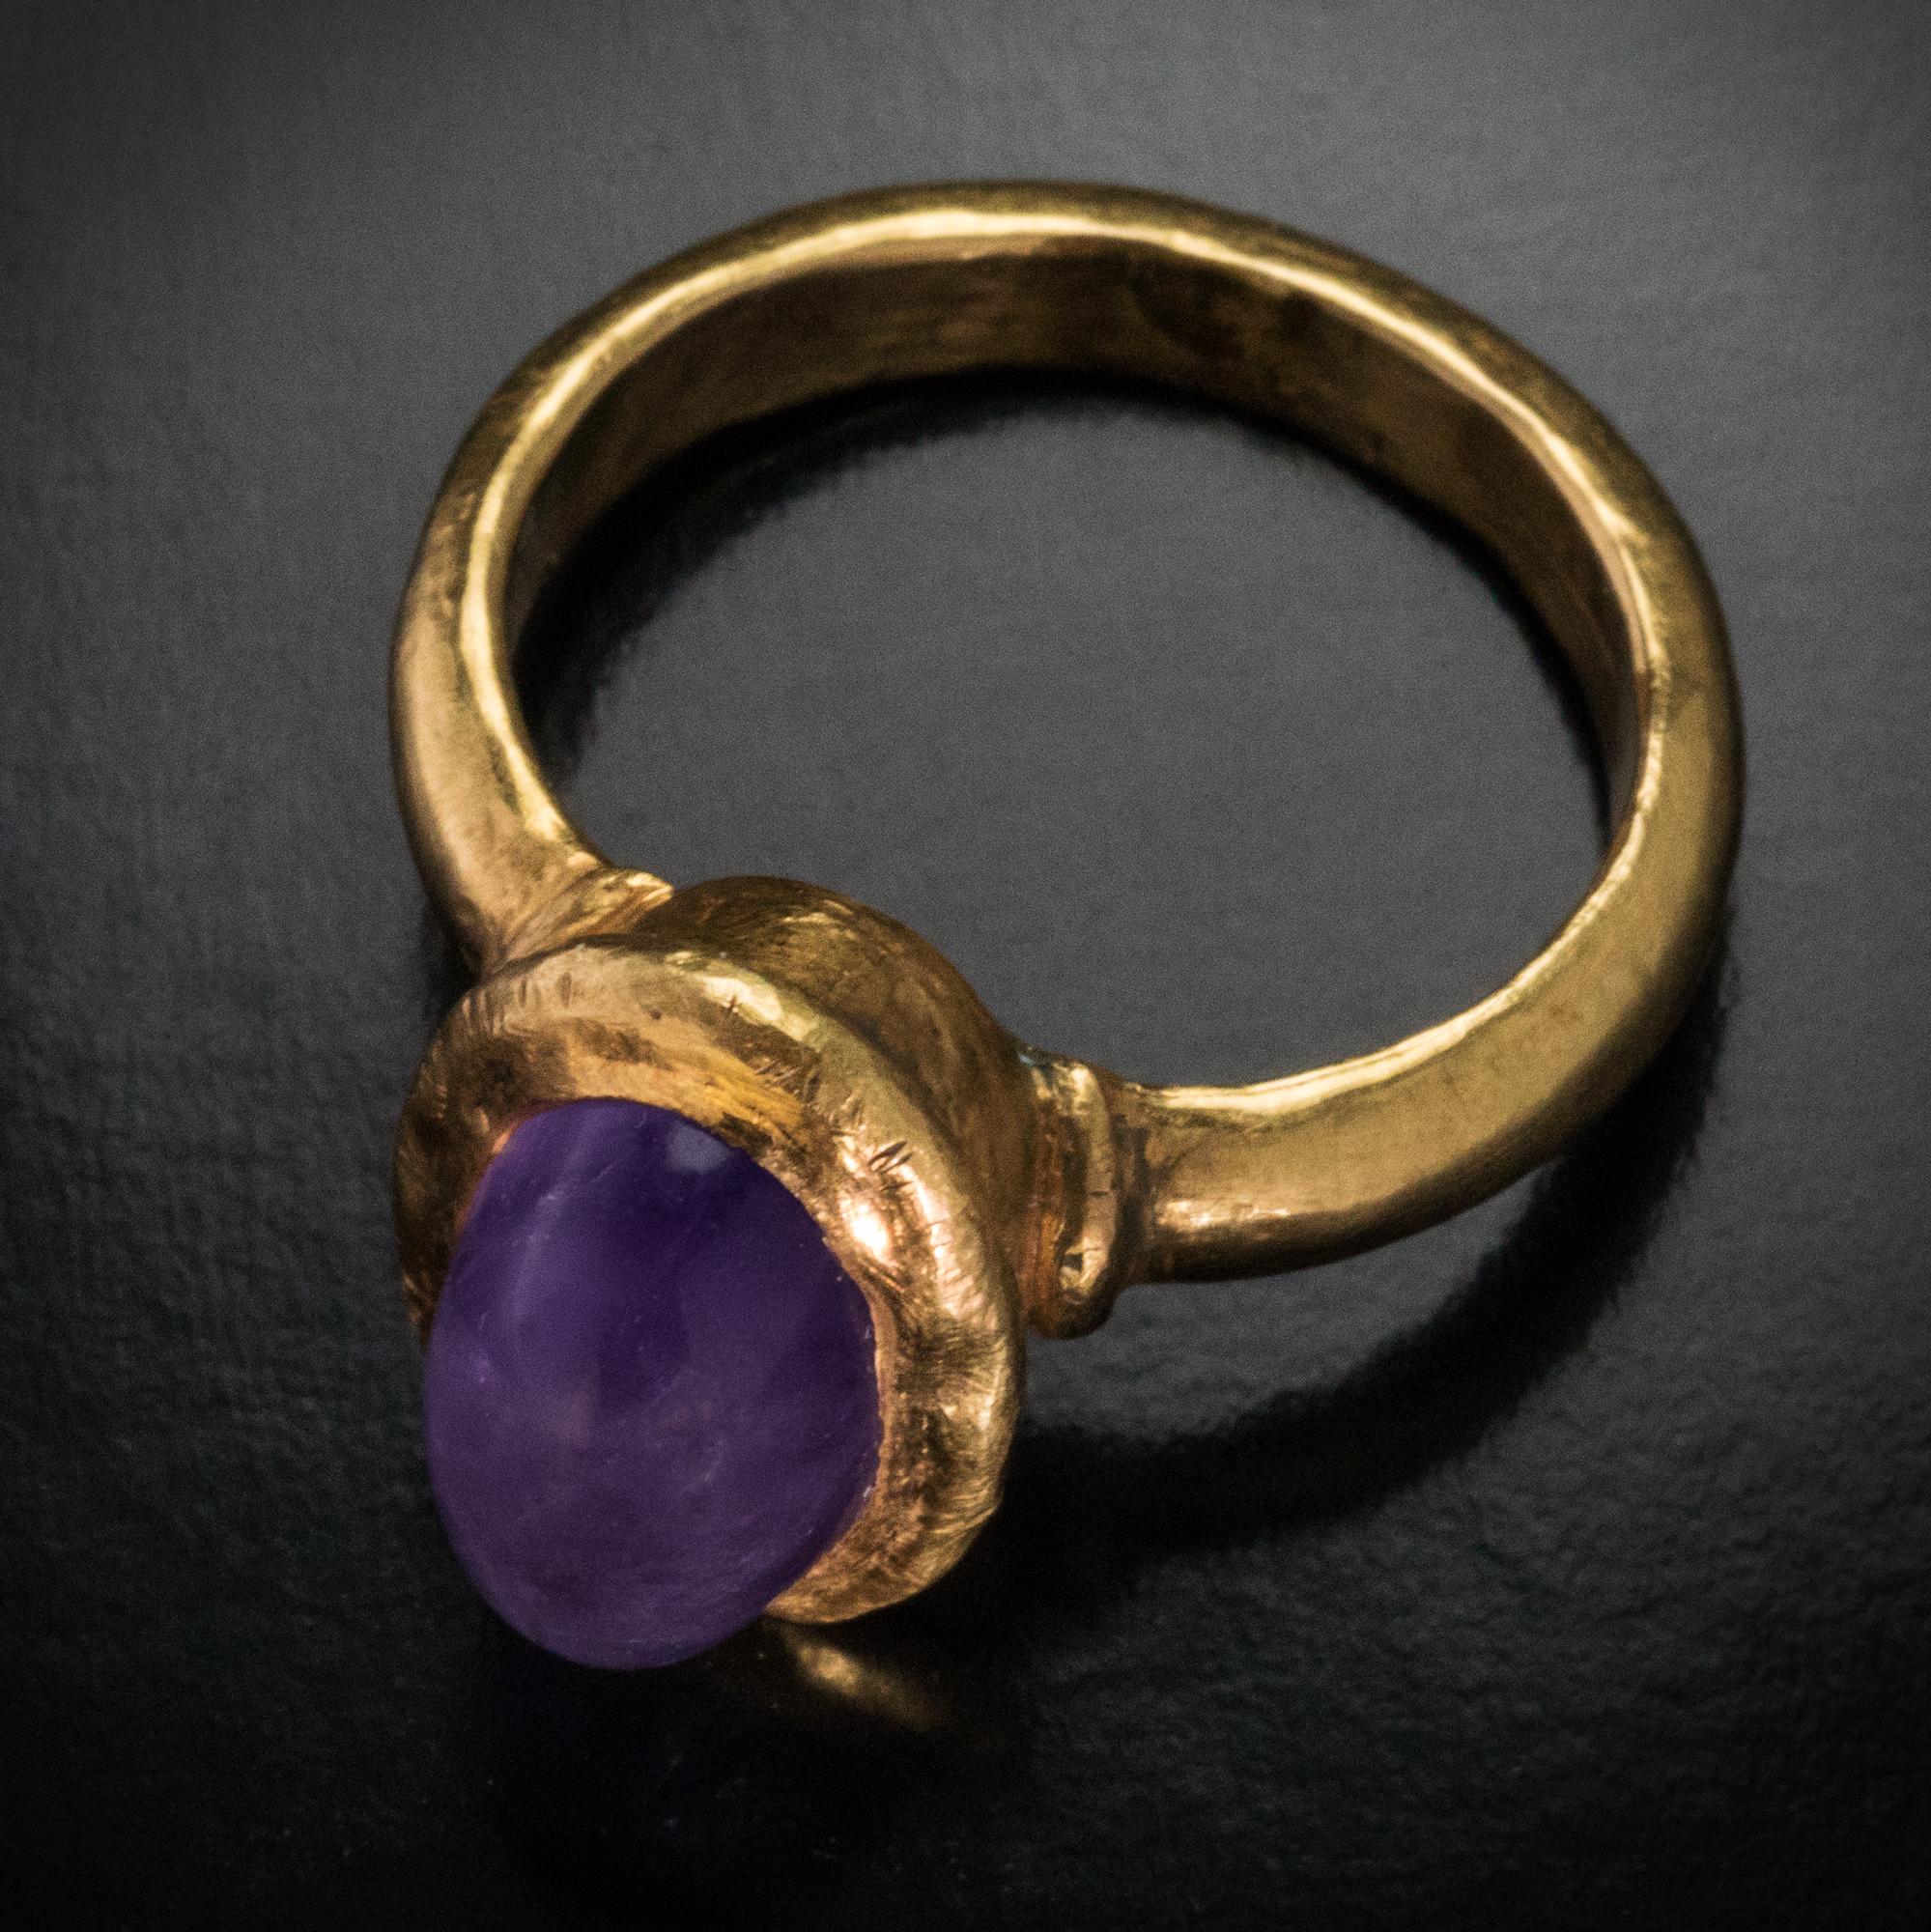 Byzantine empire, circa 6th century AD.
The hollow gold ring is embellished with an oval cabochon cut amethyst.
The amethyst measures 12.38 x 7.55 mm. Size of the bezel is 15 x 11 mm (5/8 x 7/16 in.)
Height of the setting and amethyst is 10 mm (3/8